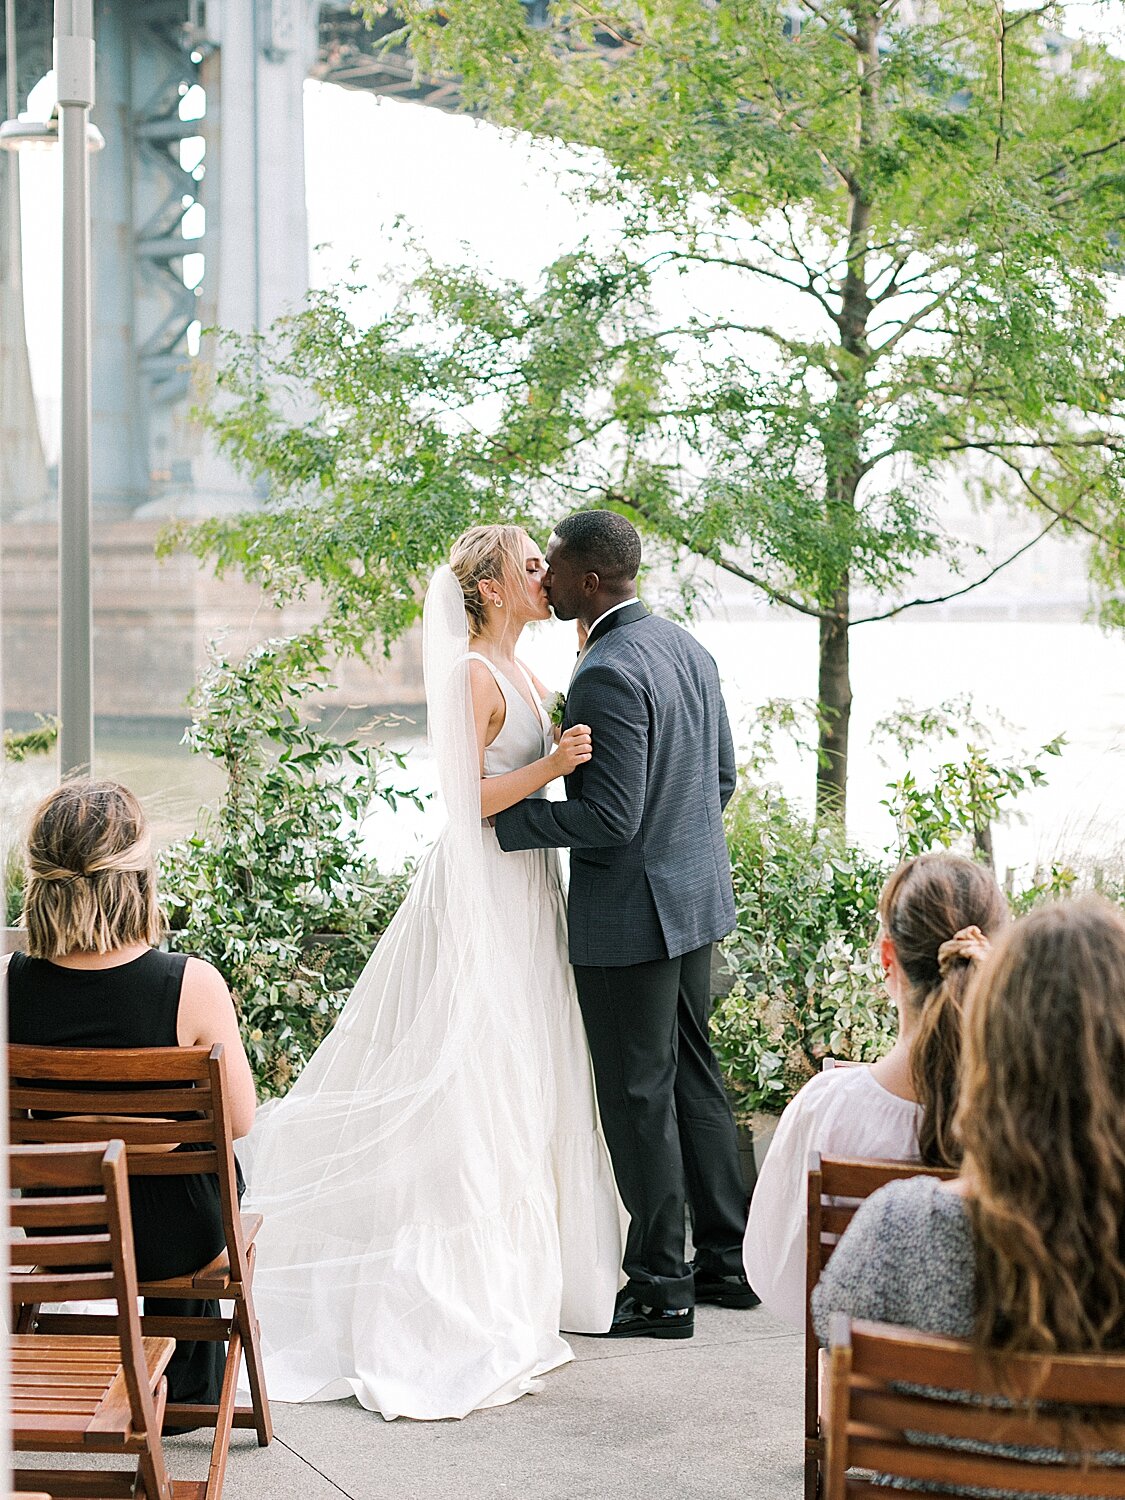 newlyweds kiss at Celestine with Brooklyn Bridge in distance | Asher Gardner Photography | Intimate Ceremony in DUMBO New York